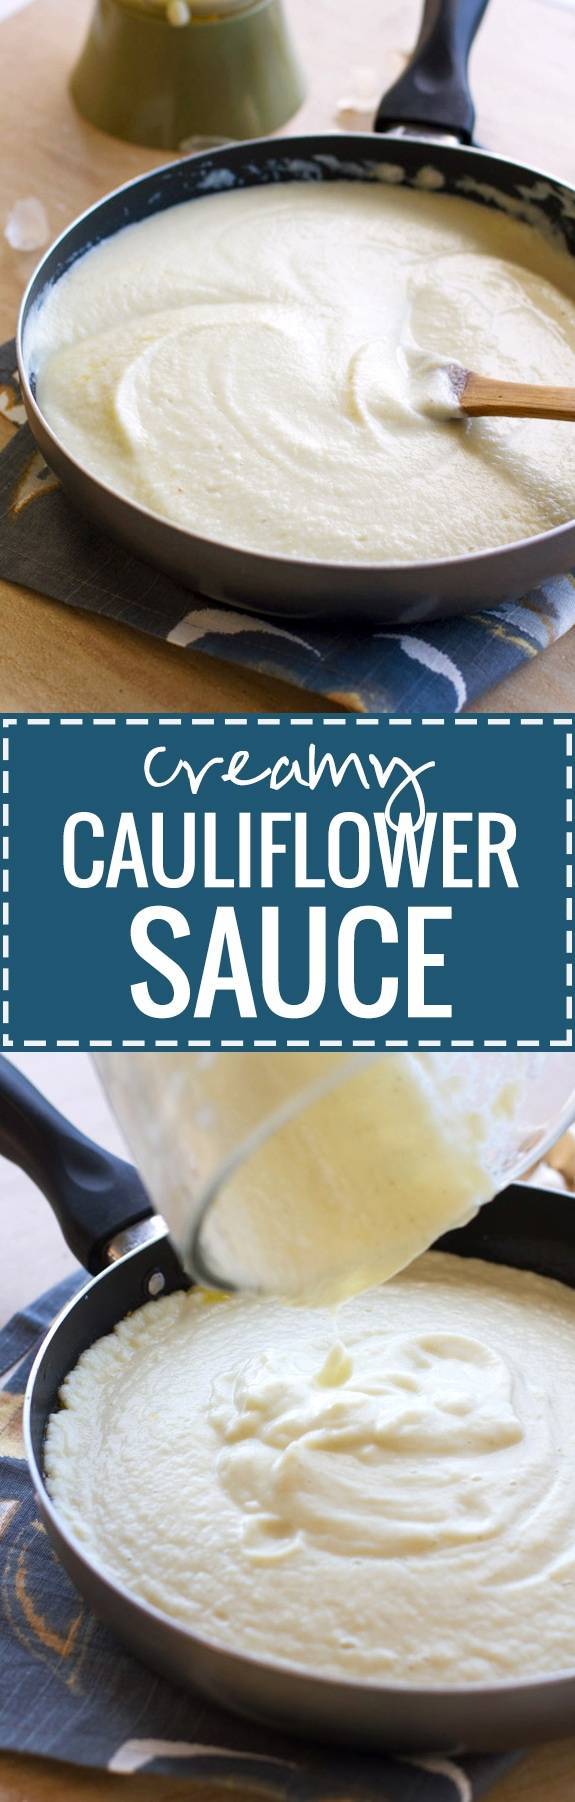 Creamy Cauliflower Sauce - a healthy version of an Alfredo or cream sauce recipe. EXTREMELY popular - 4.8 stars from 150 reviews! | pinchofyum.com